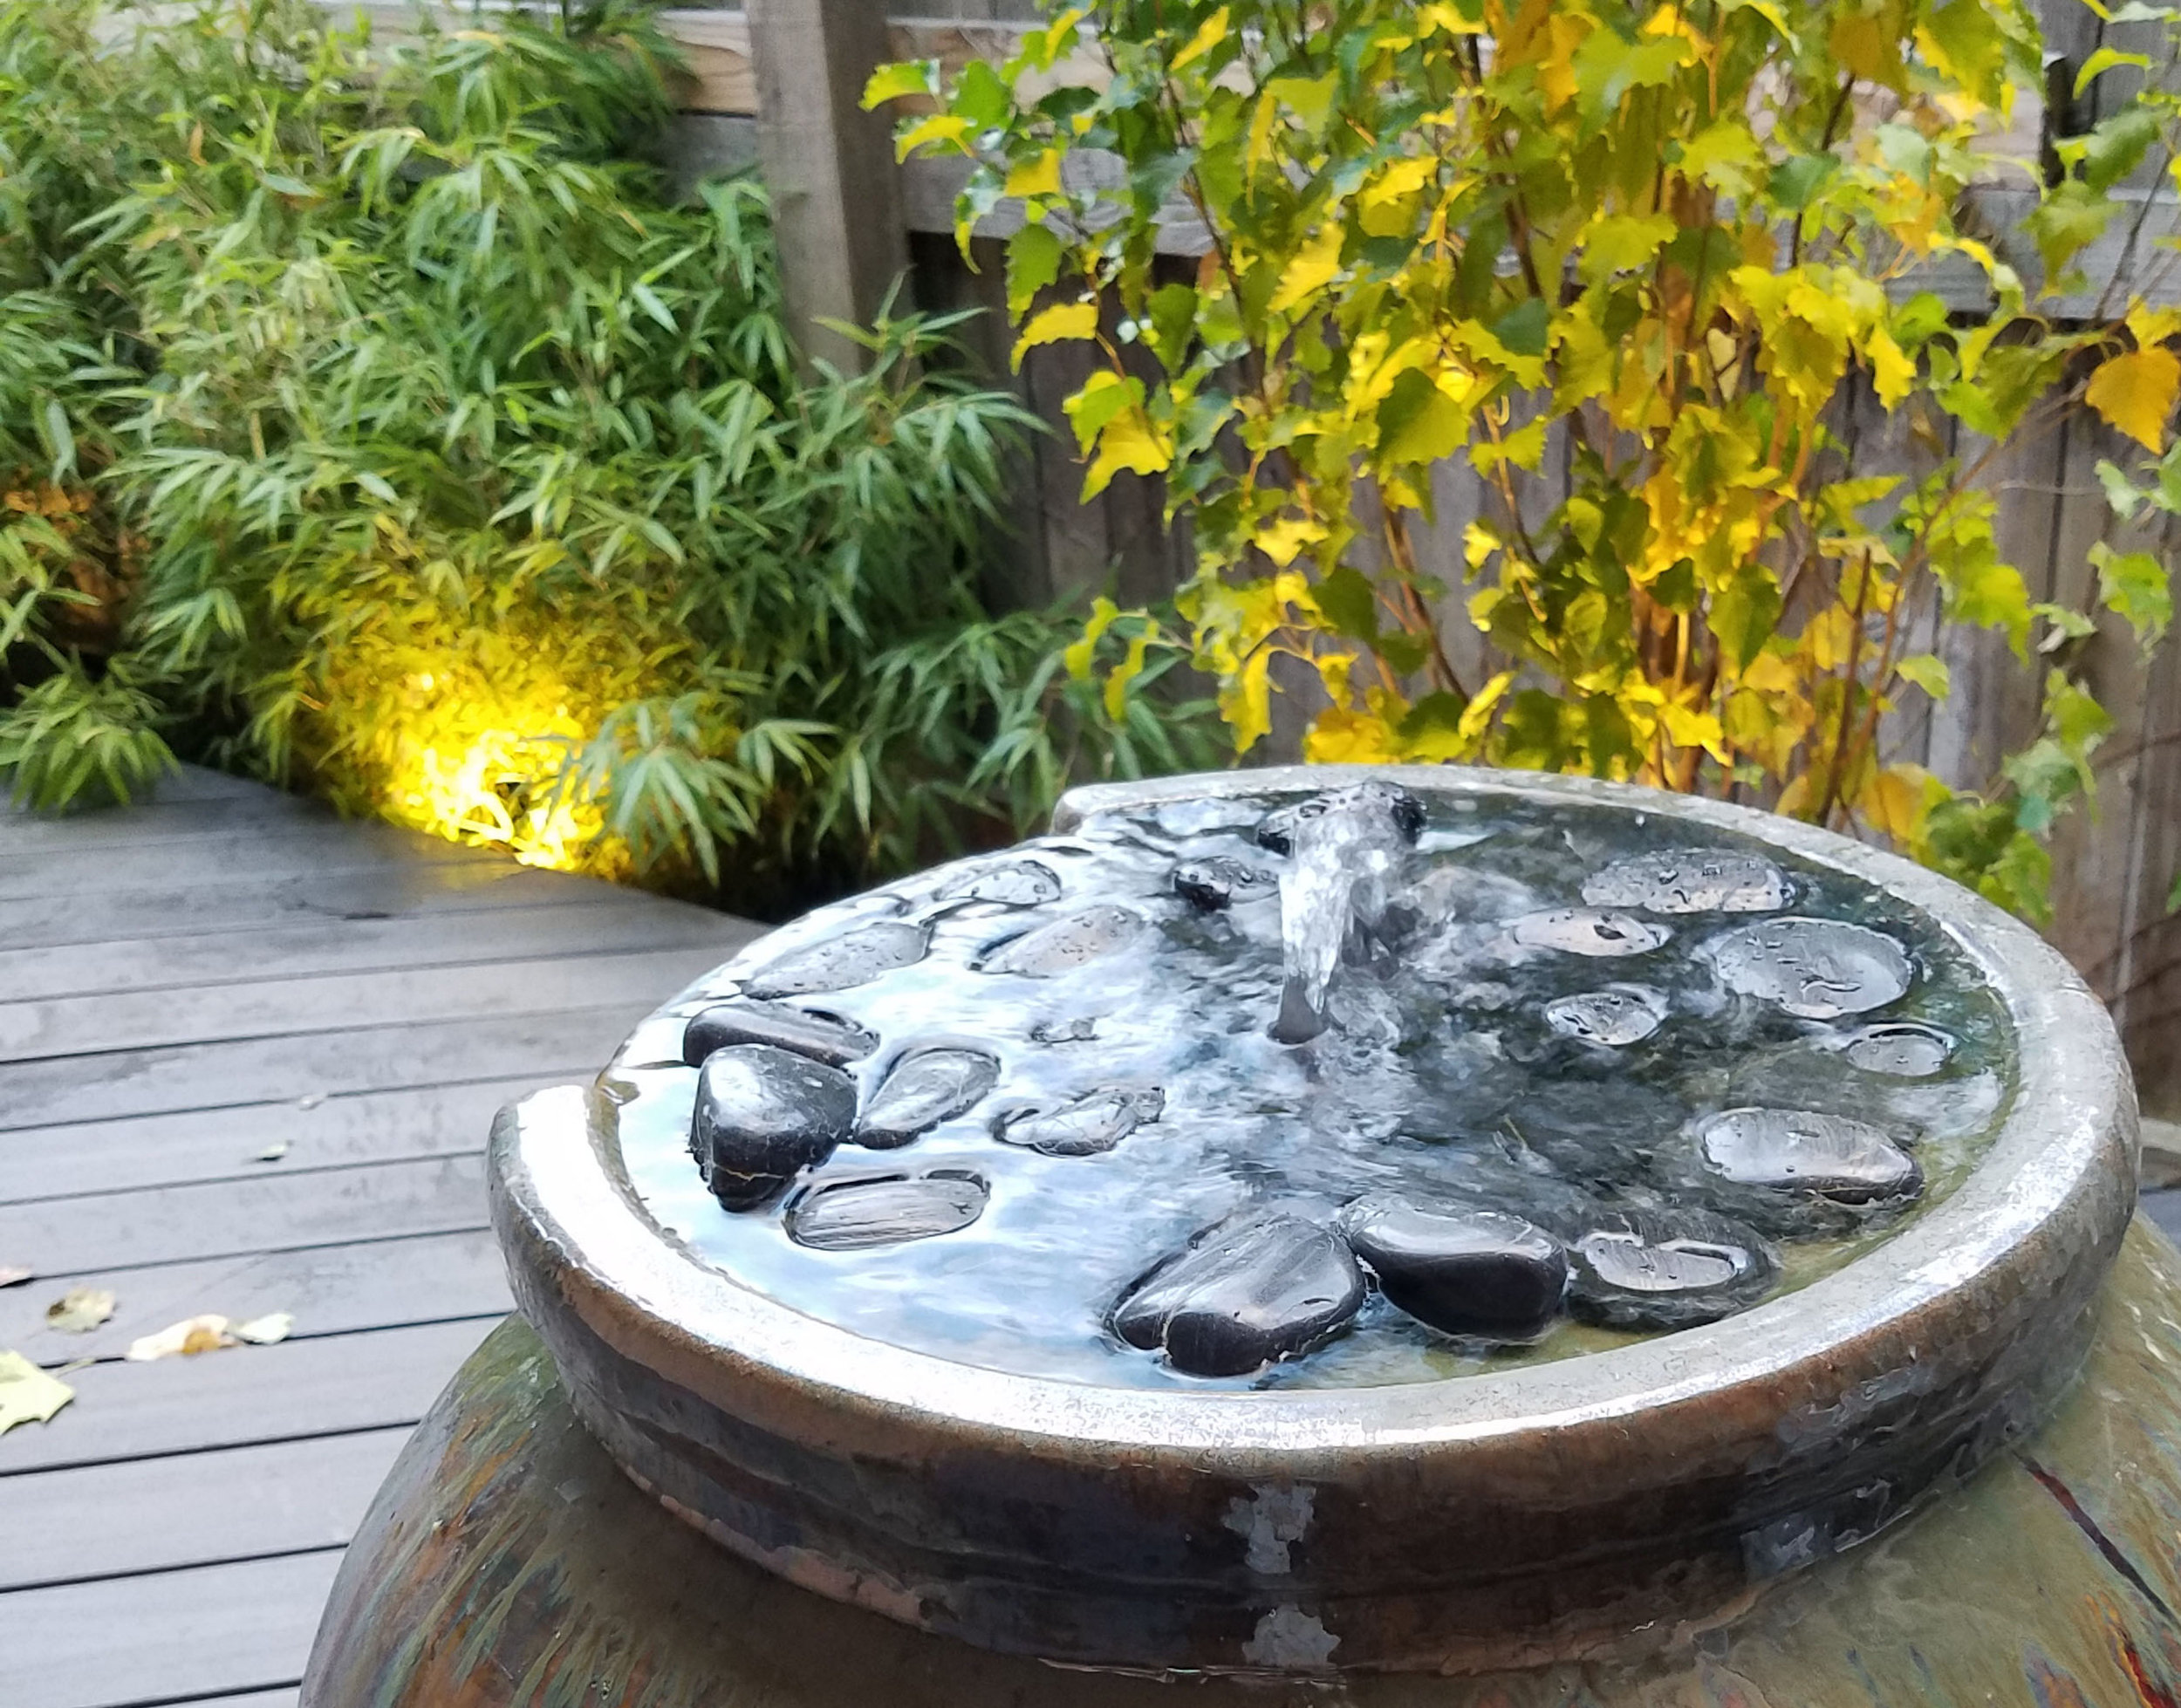 A WATER FEATURE PROVIDES THE MUSIC TO THIS TRANQUIL SCENE